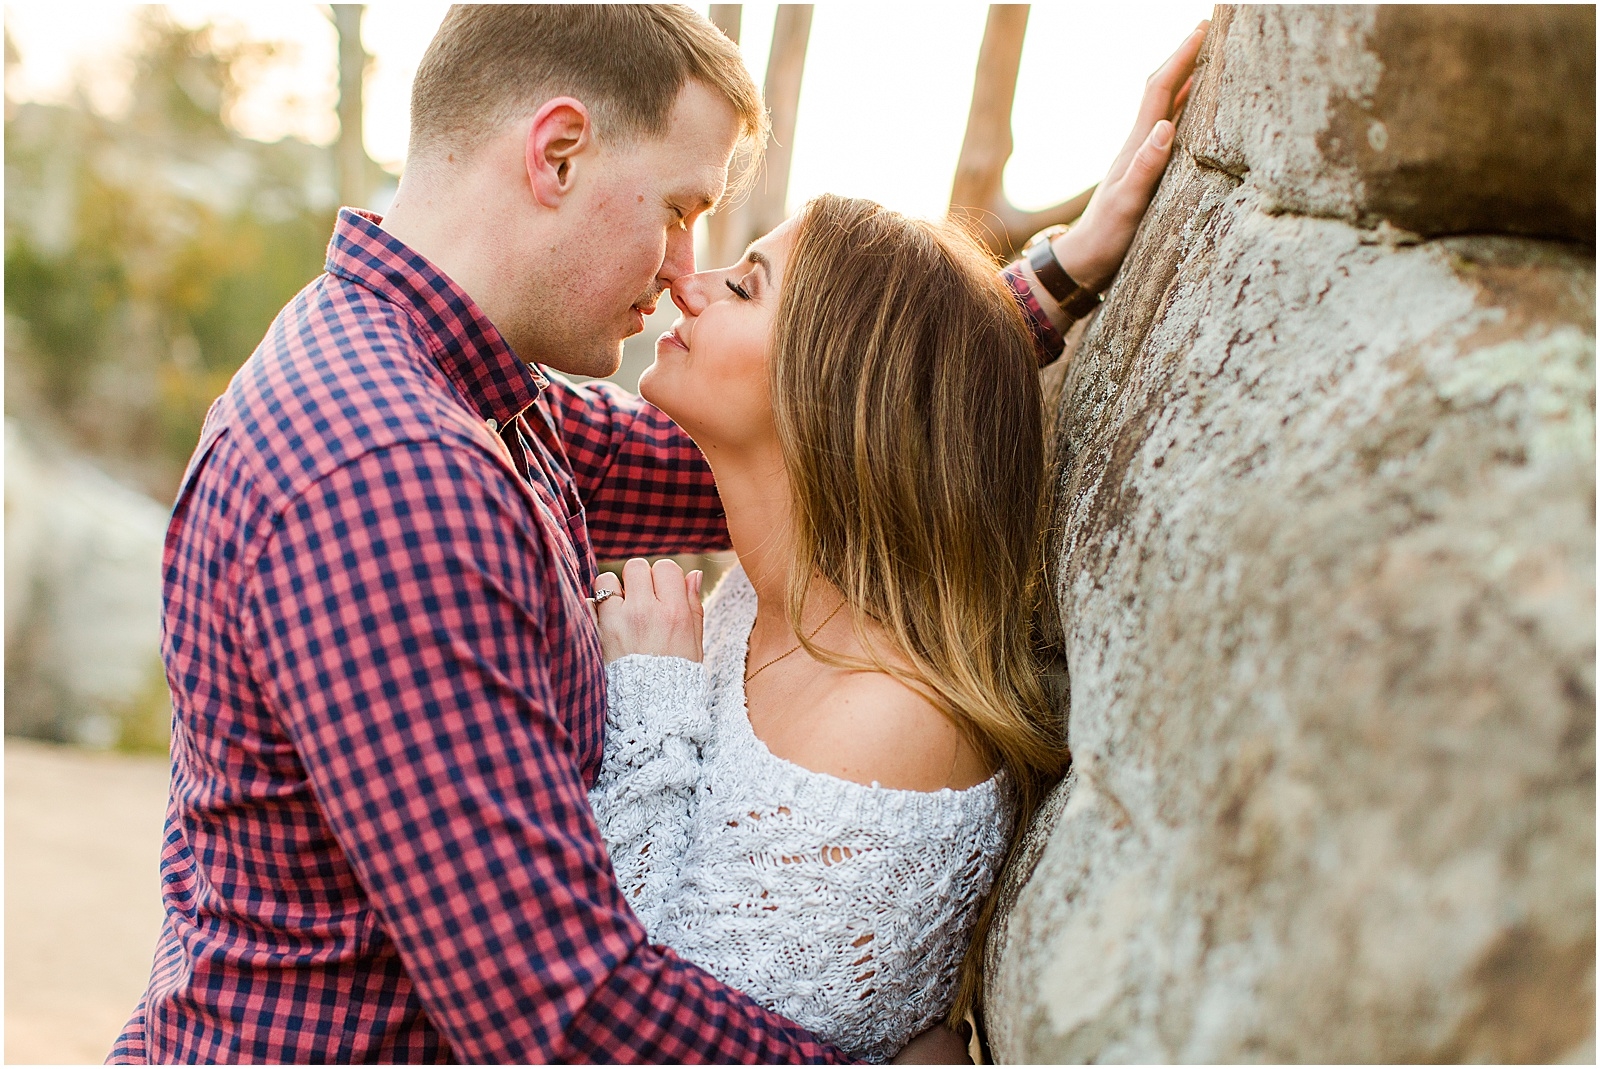 A Sunny Garden of the Gods Engagement Session | Shiloh and Lee | Bret and Brandie Photography069.jpg